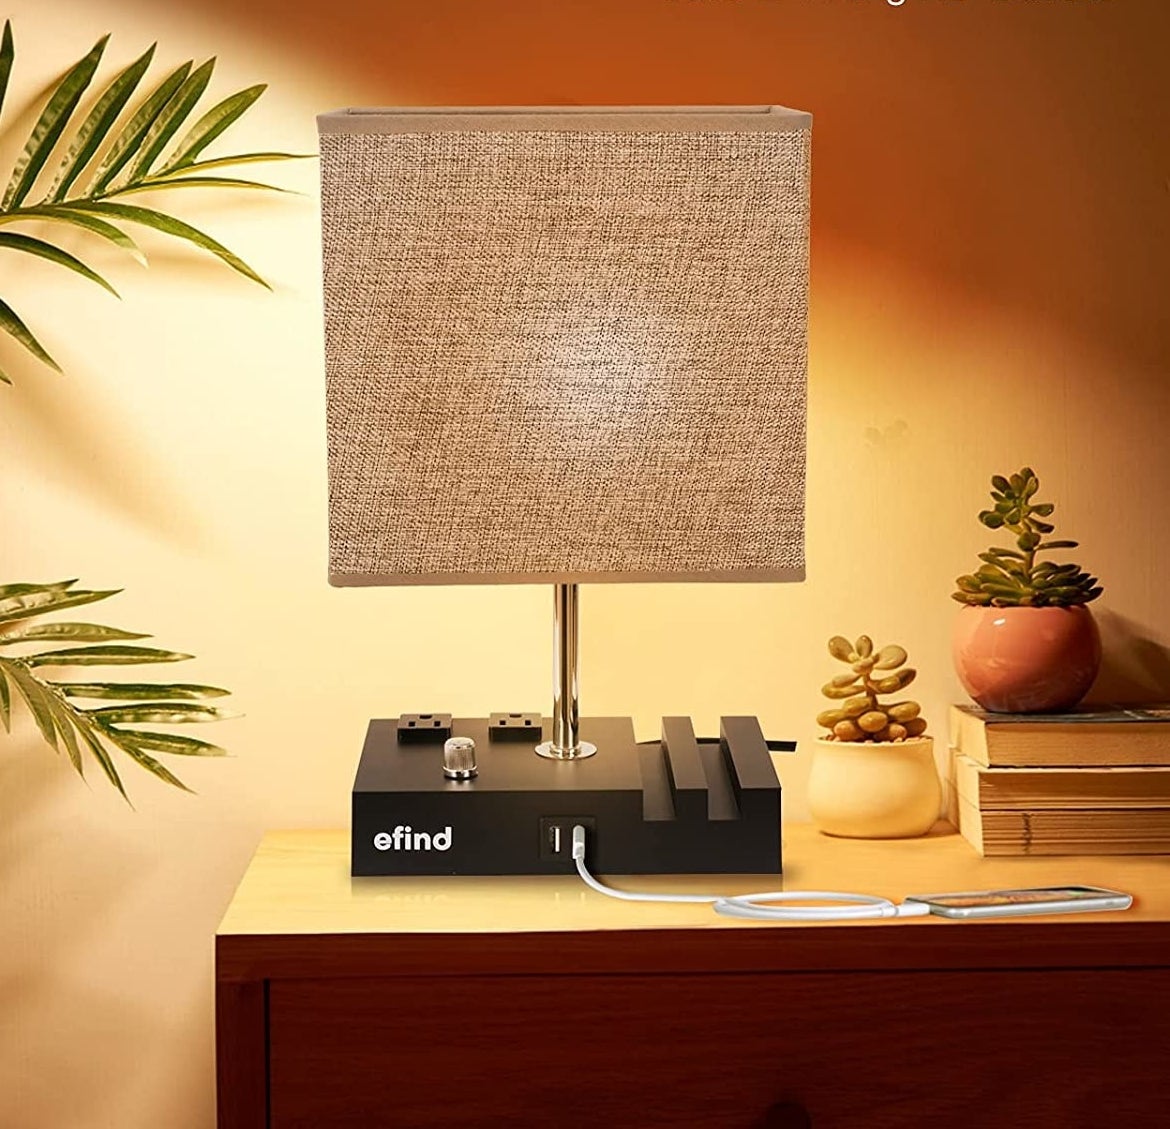 the table lamp on, on a nightstand